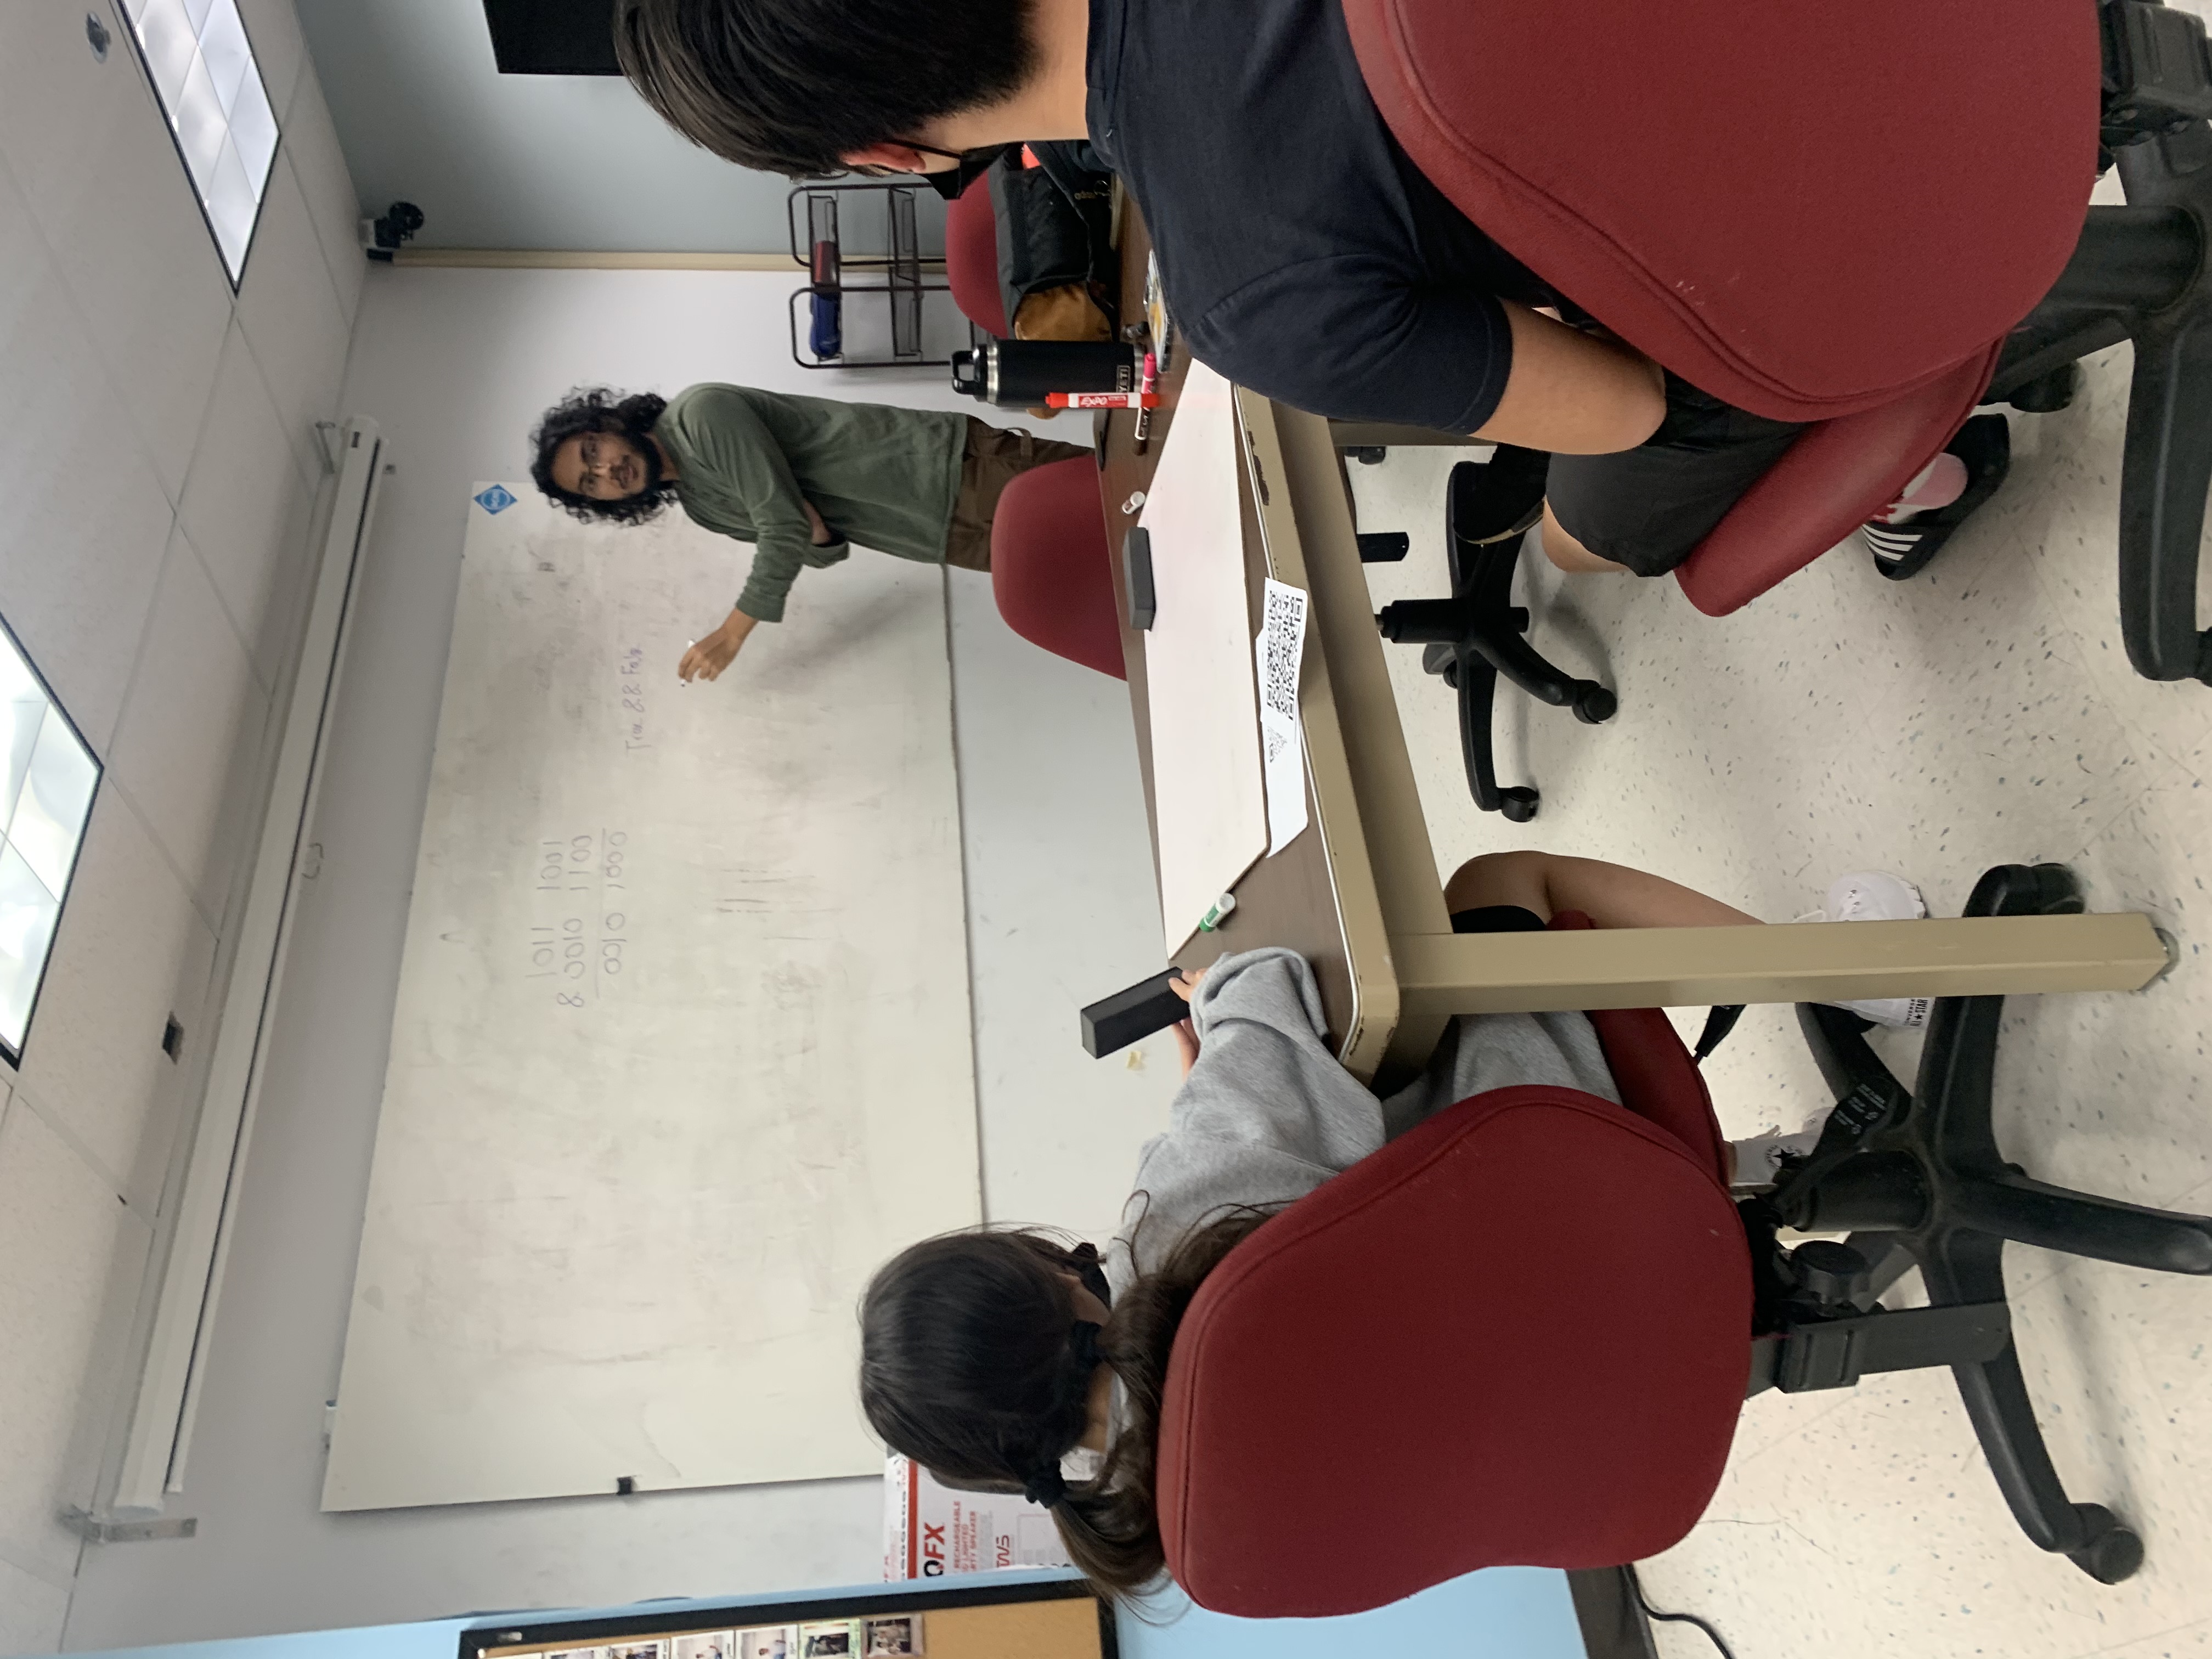 A man lecturing to two students in front of a whiteboard